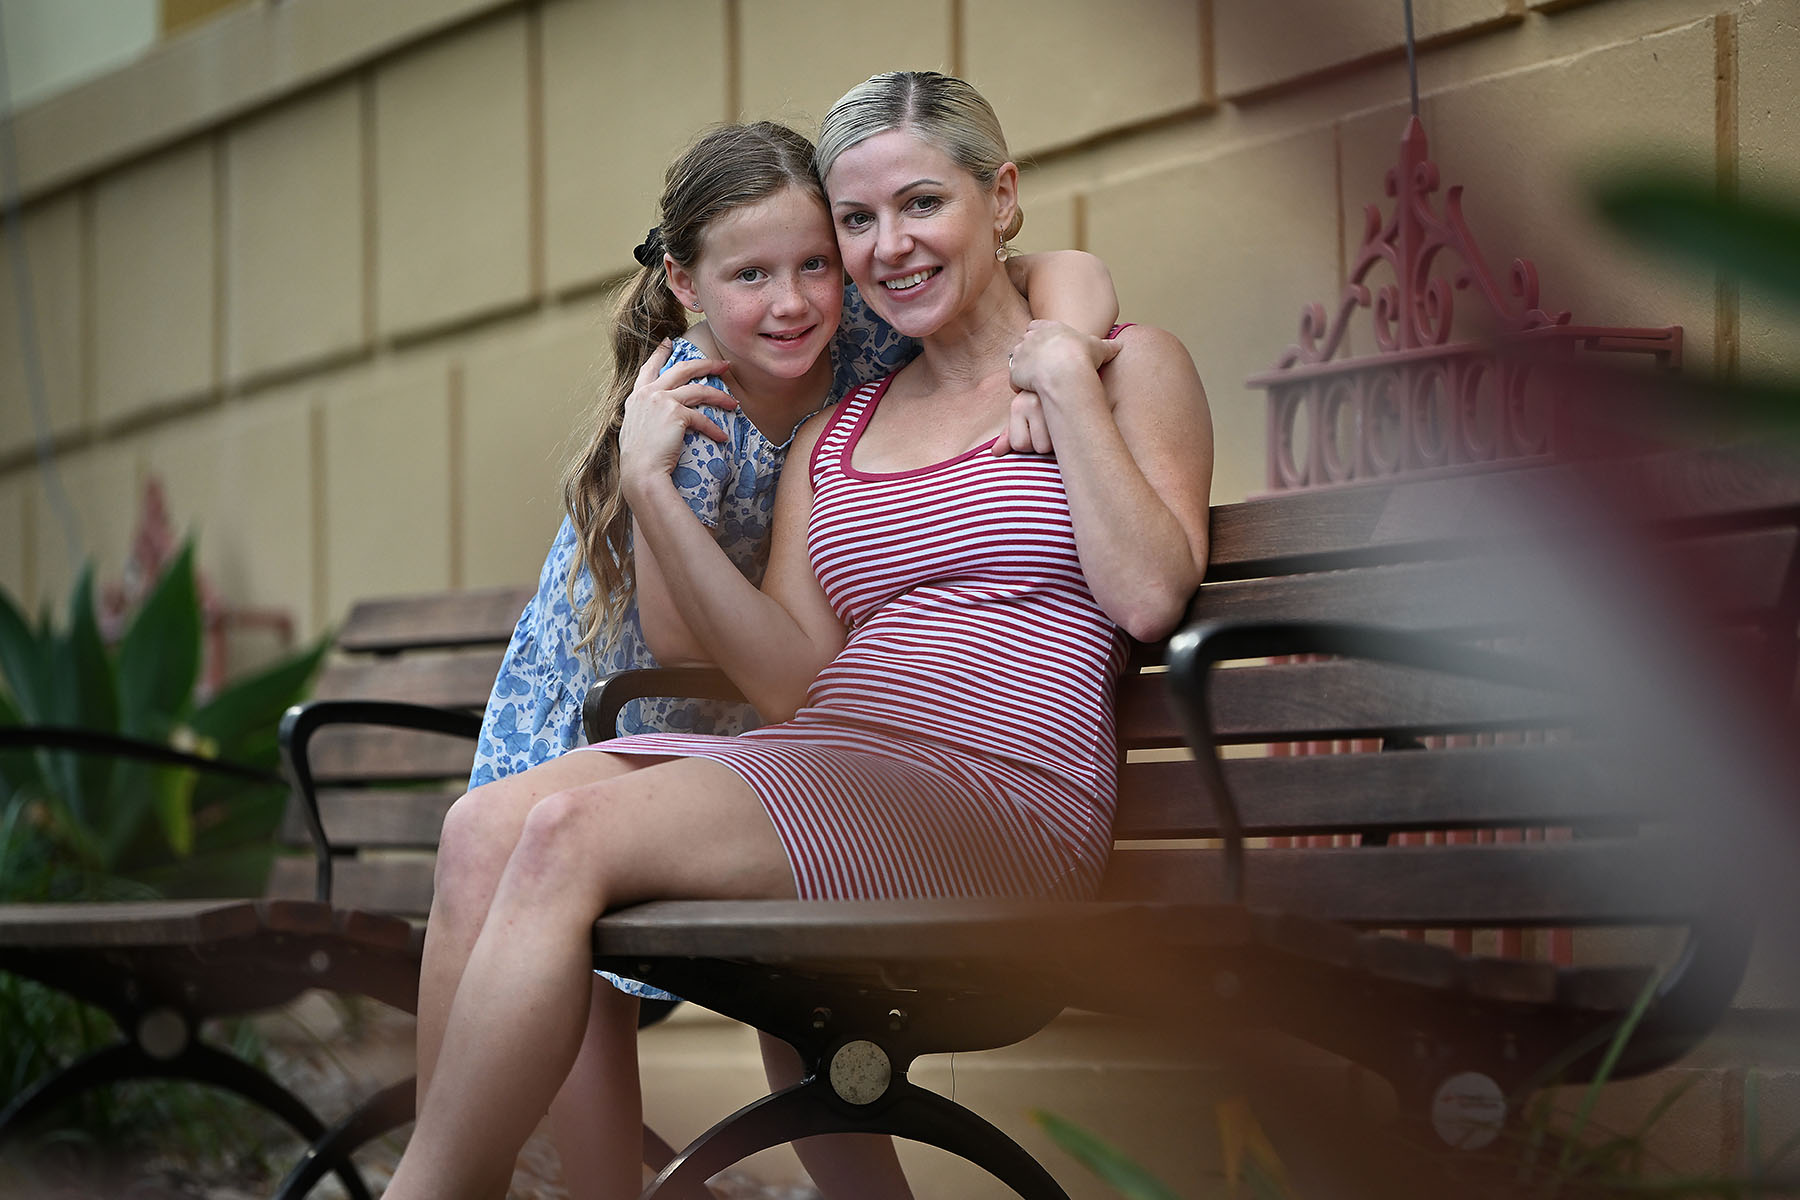 Kristina sitting with her daughter on a bench